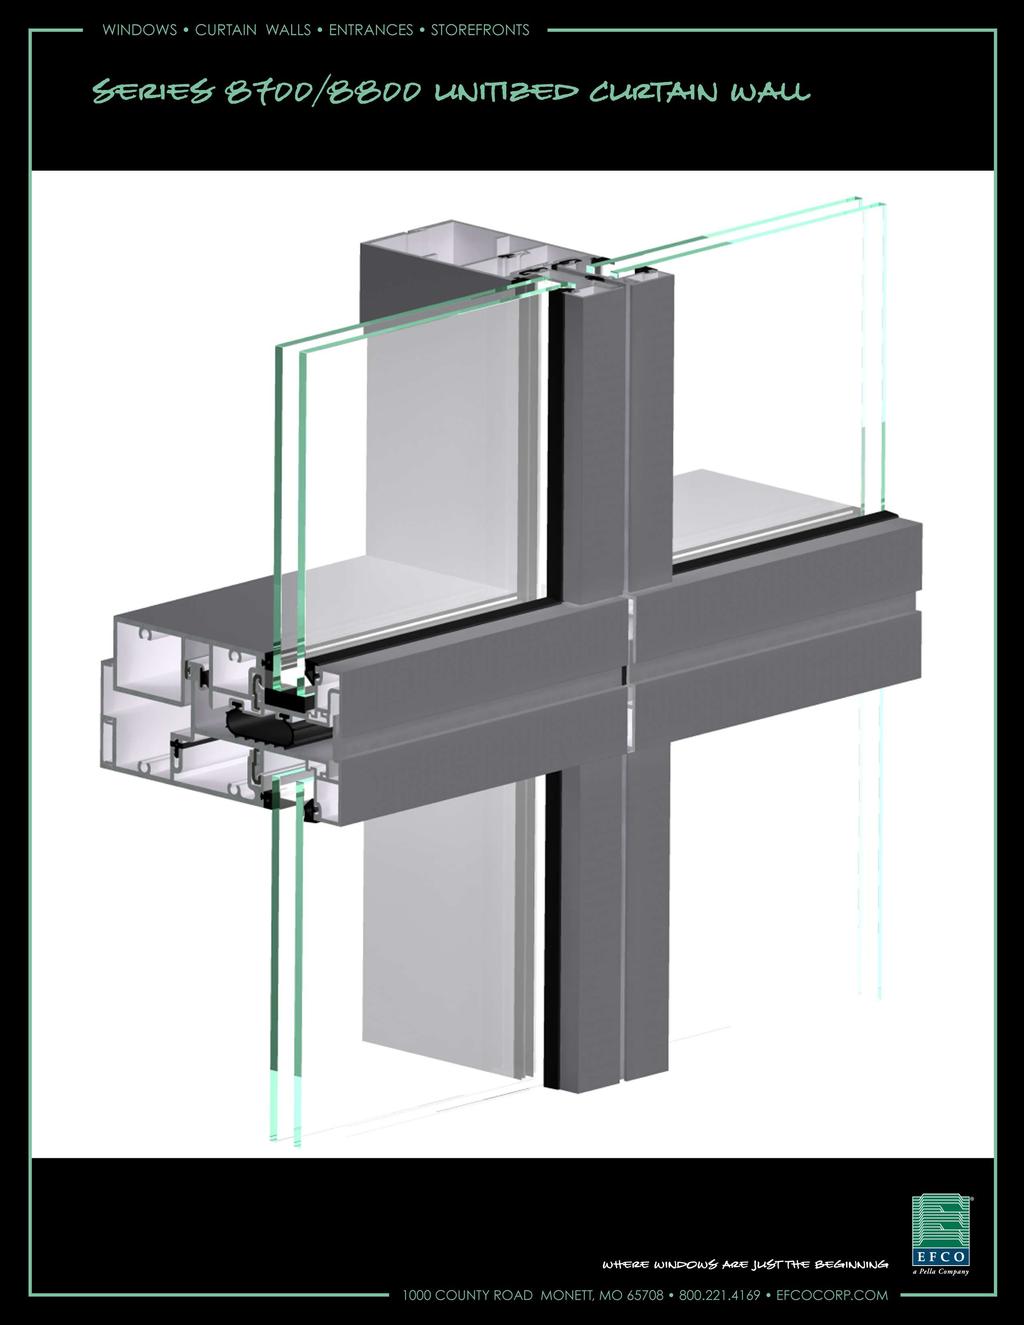 SERIES 8750XD UNITIZED CURTAIN WALL Installation Instructions Sections 1-15